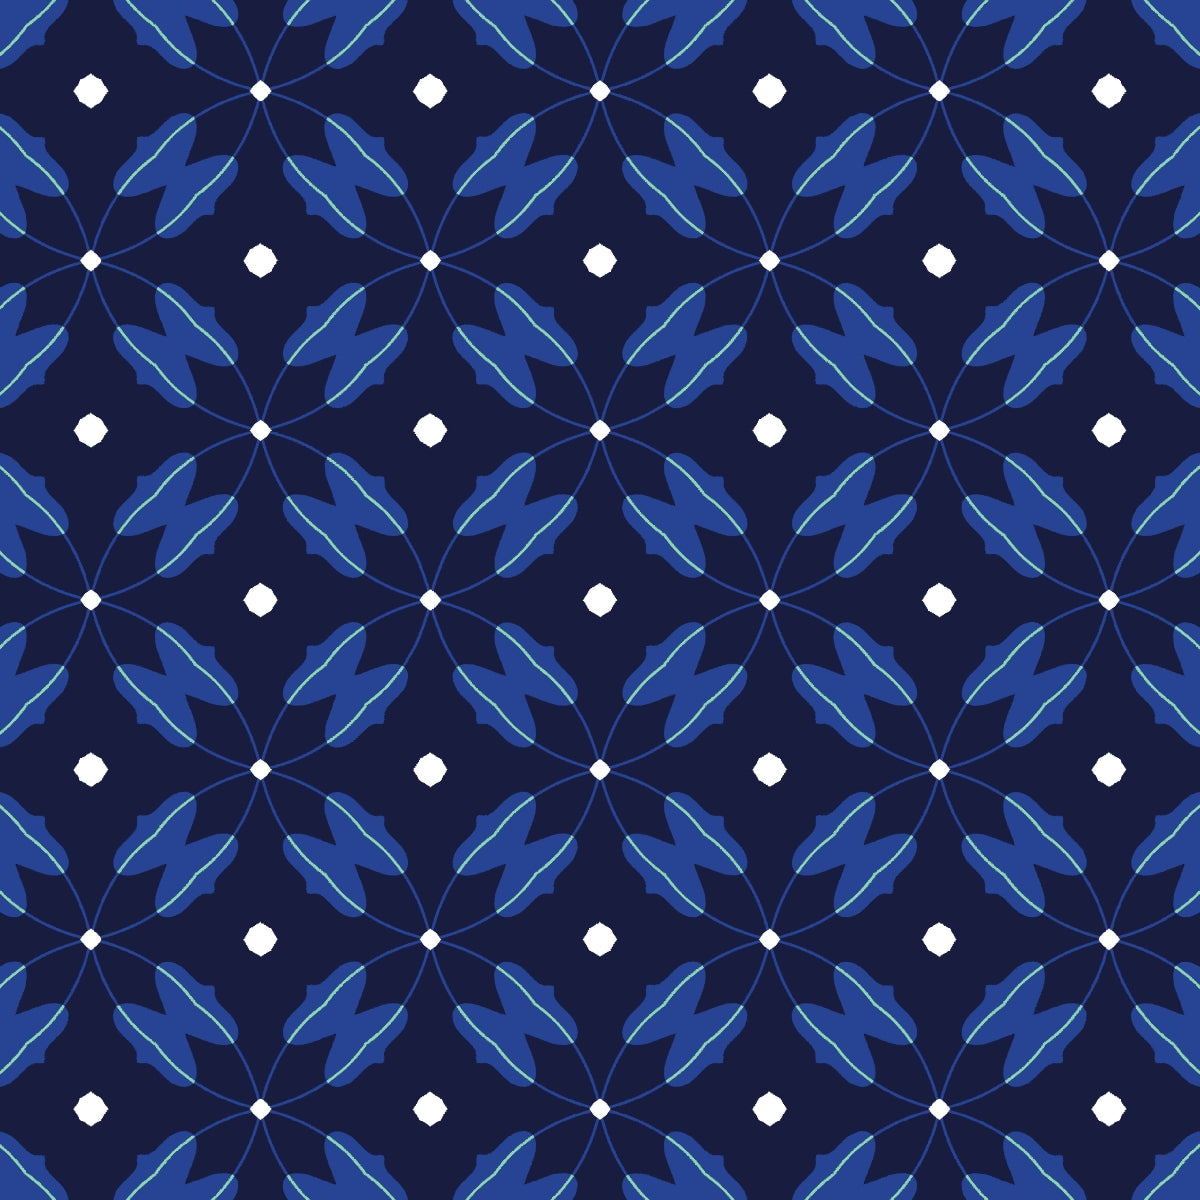 Blue Abstract Seamless Pattern 24.0 - Printable Scrapbook Paper